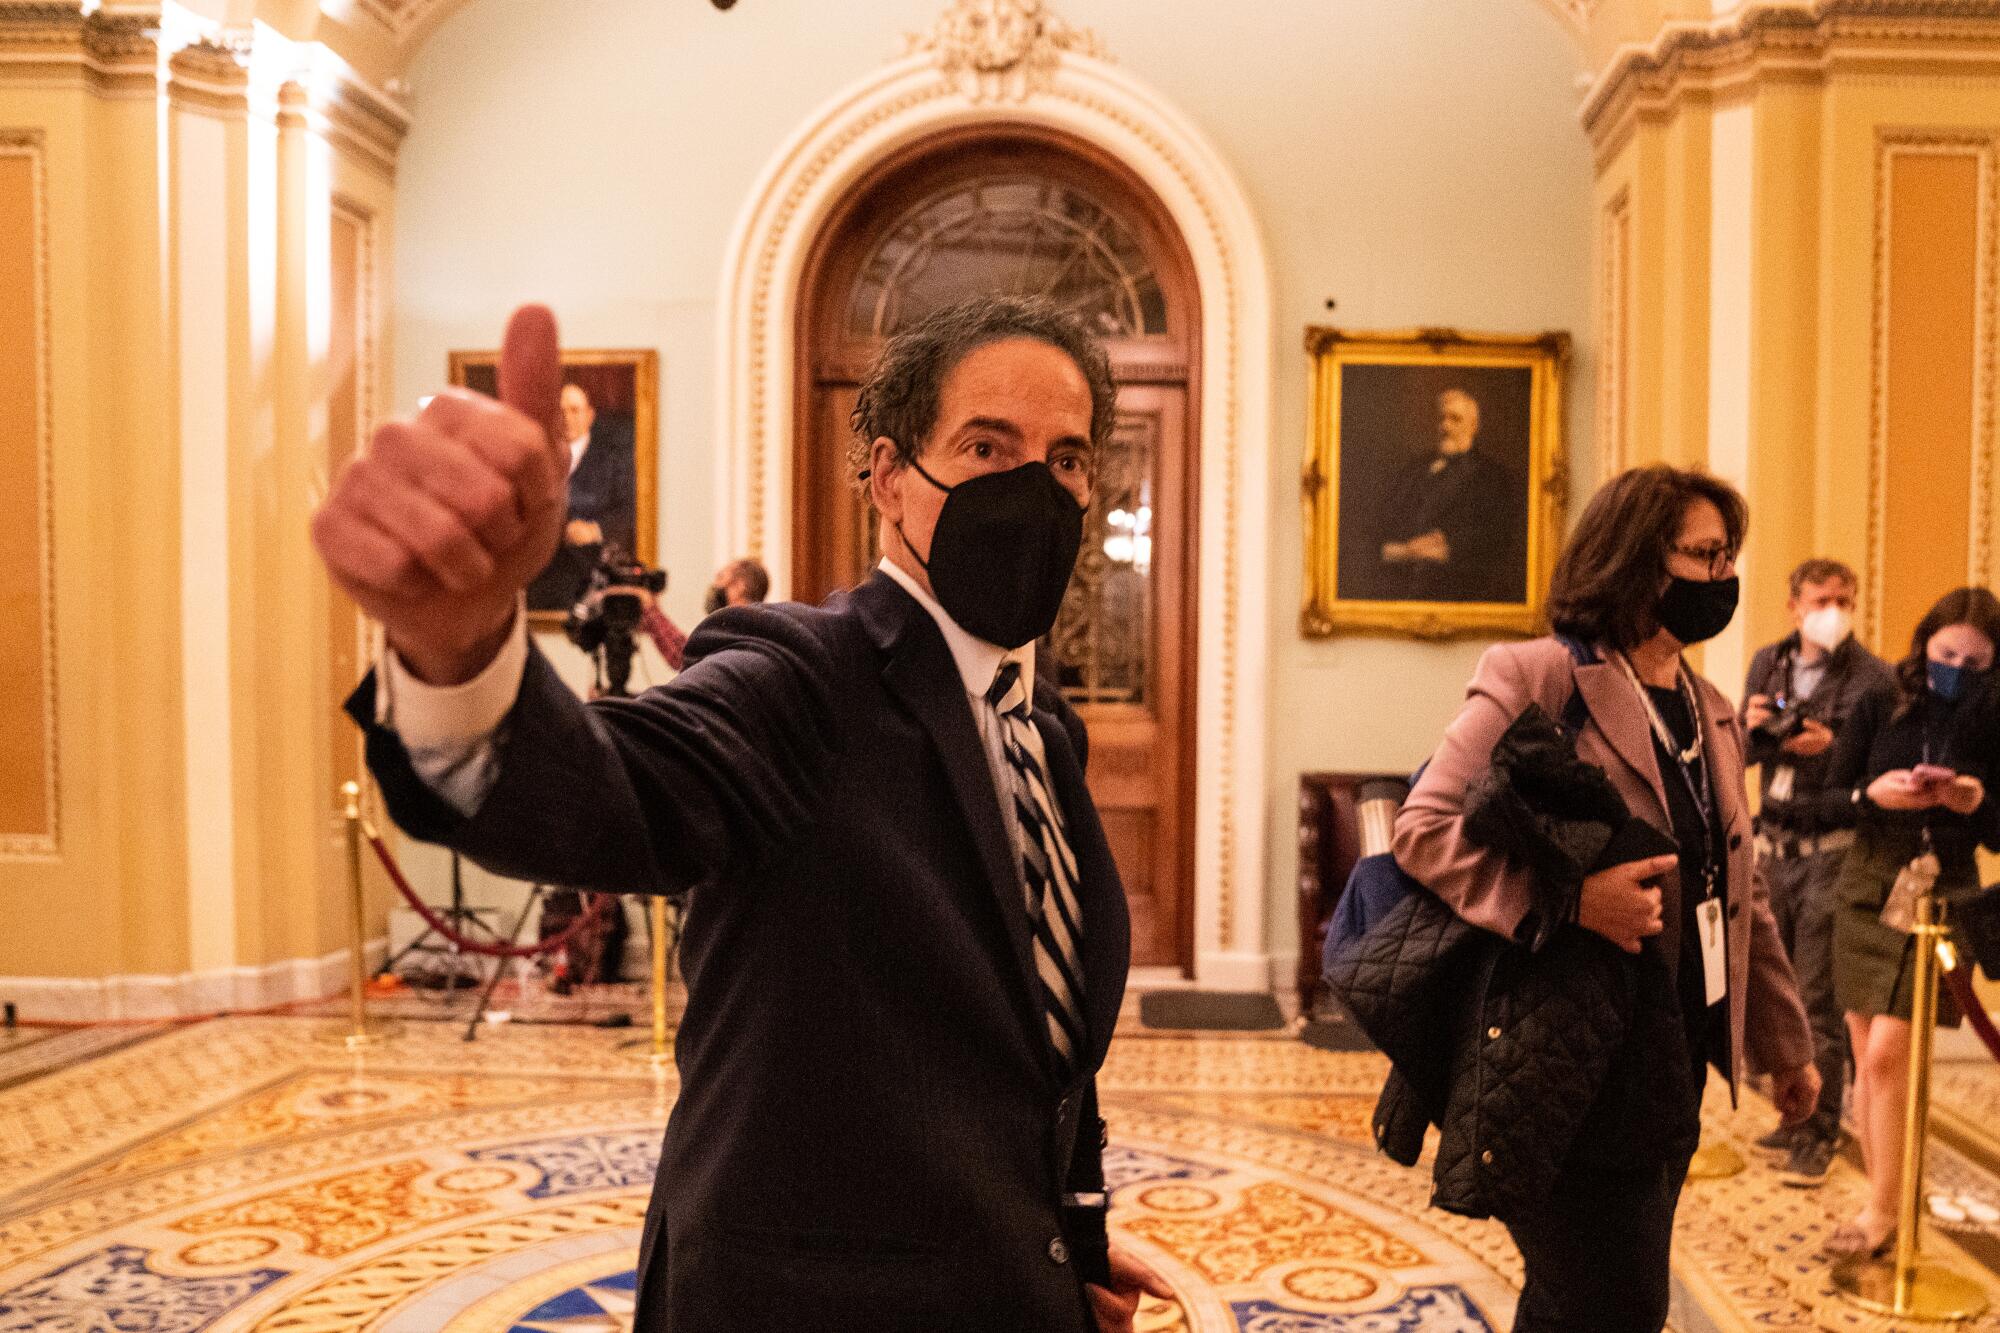 A congressman in a mask gives a thumbs-up